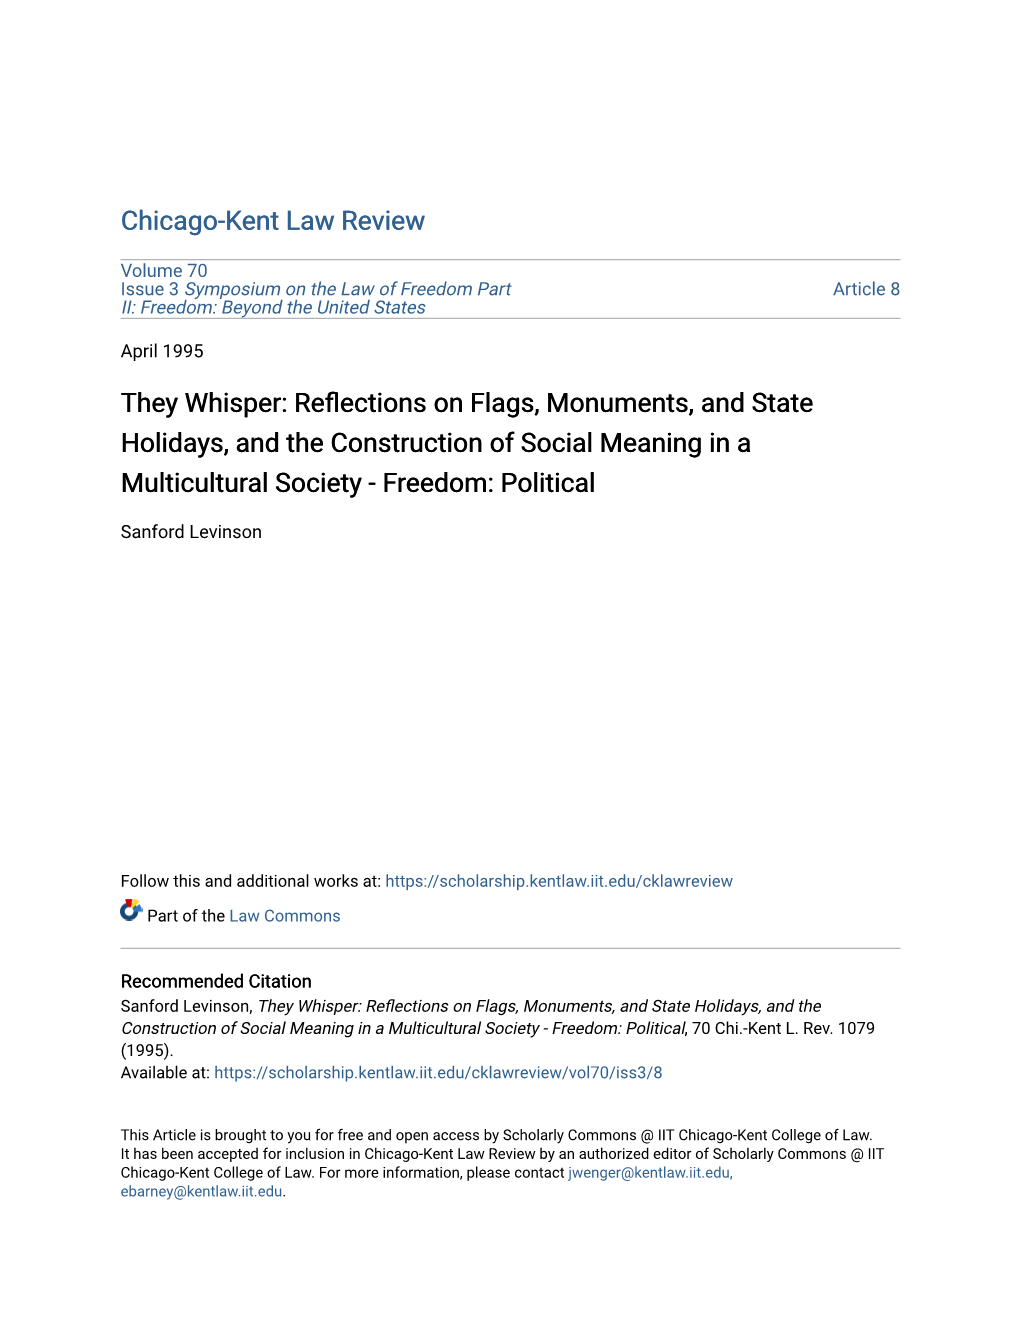 They Whisper: Reflections on Flags, Monuments, and State Holidays, and the Construction of Social Meaning in a Multicultural Society - Freedom: Political